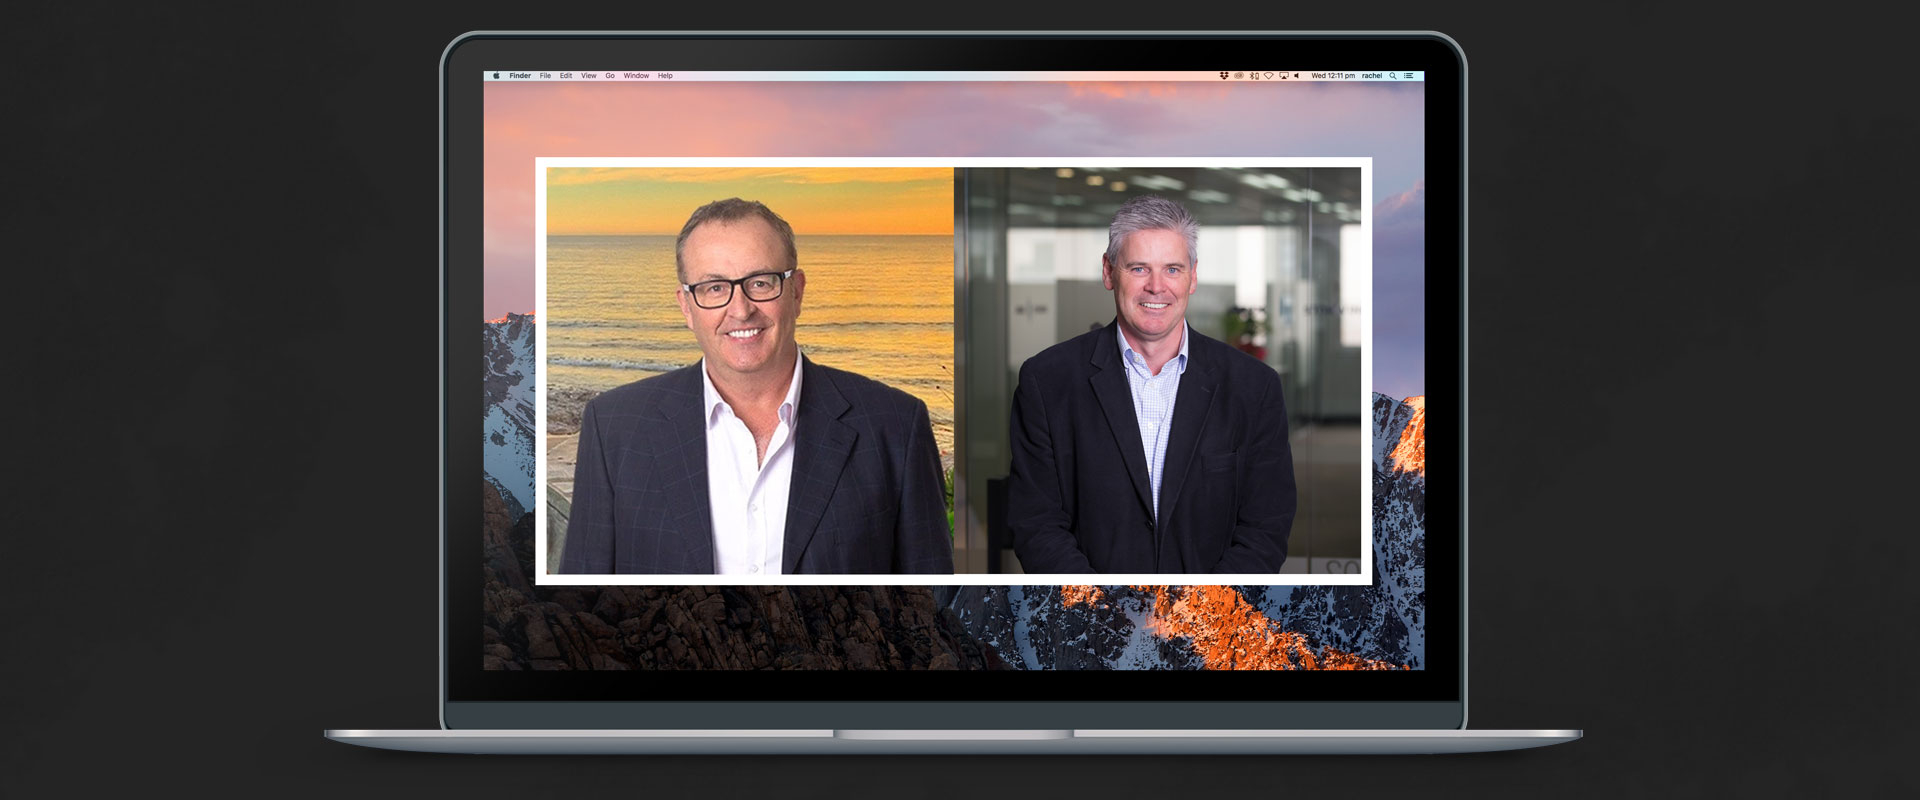 Chris Smith and Damian Kernahan's images side-by-side on a laptop screen, showing them together in Chris Smith Show Interview on 2GB.